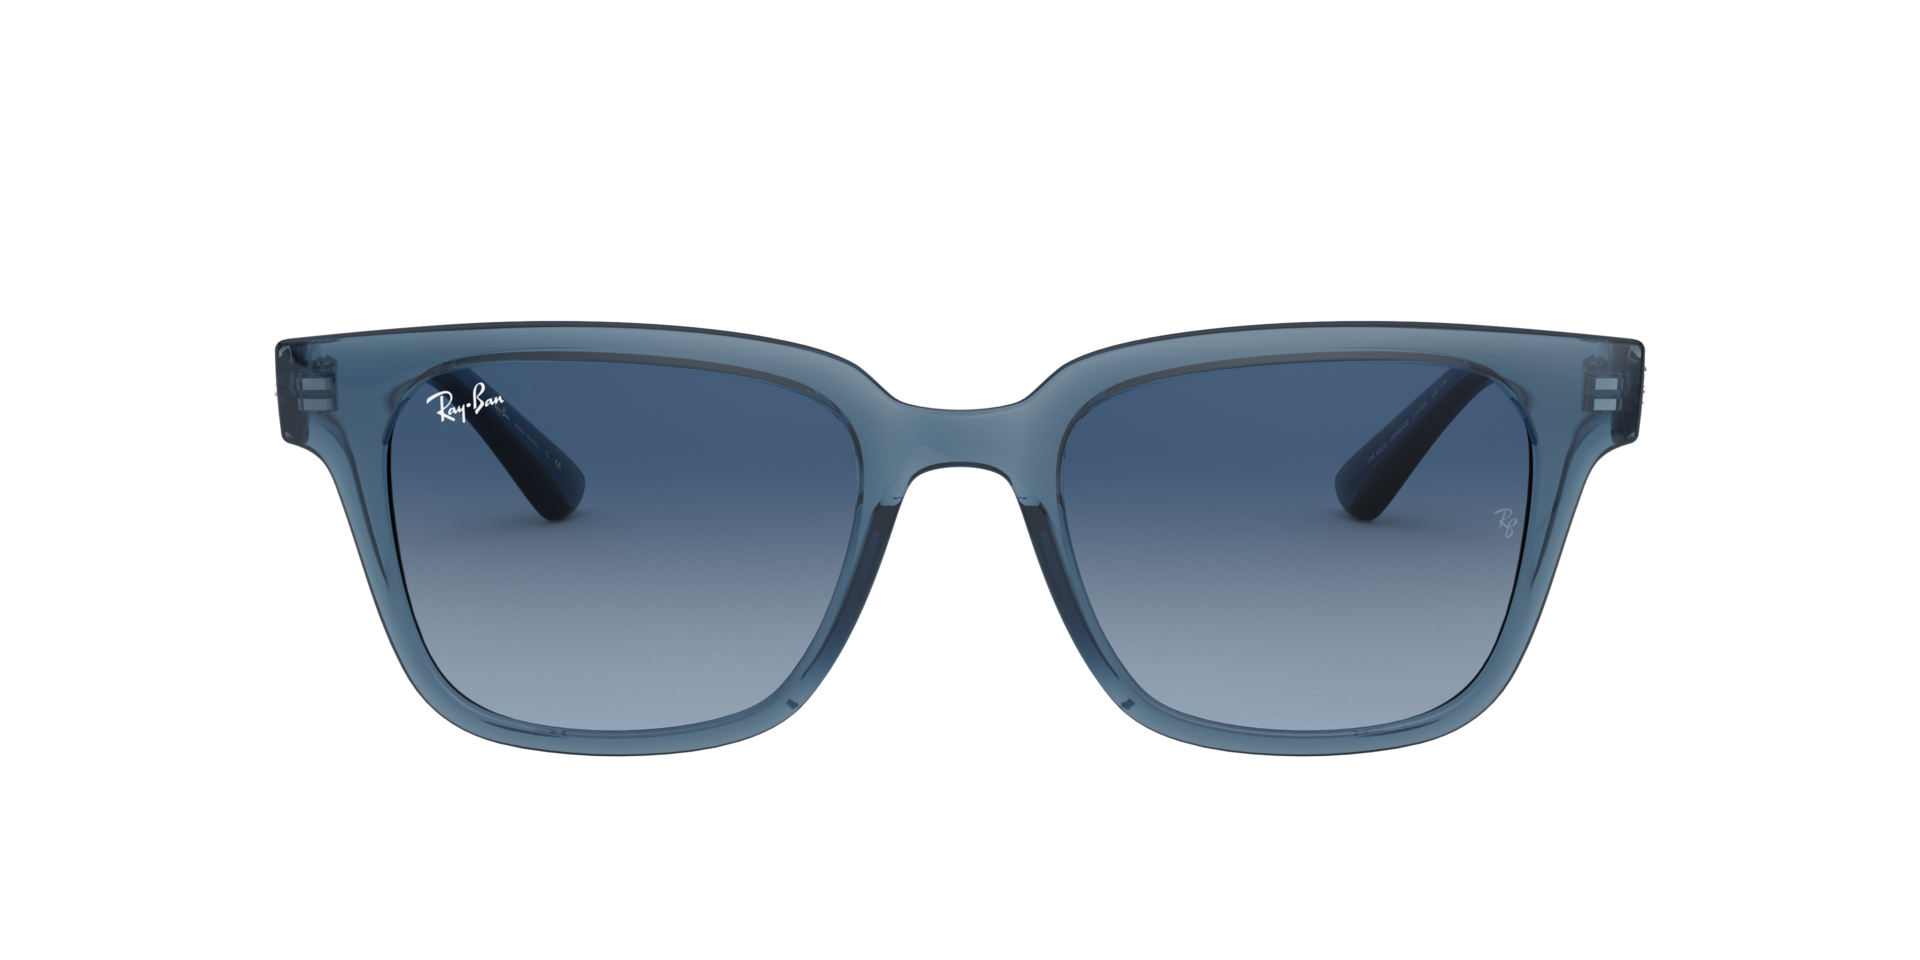 Buy Ray-Ban Rb4323 Sunglasses Online.